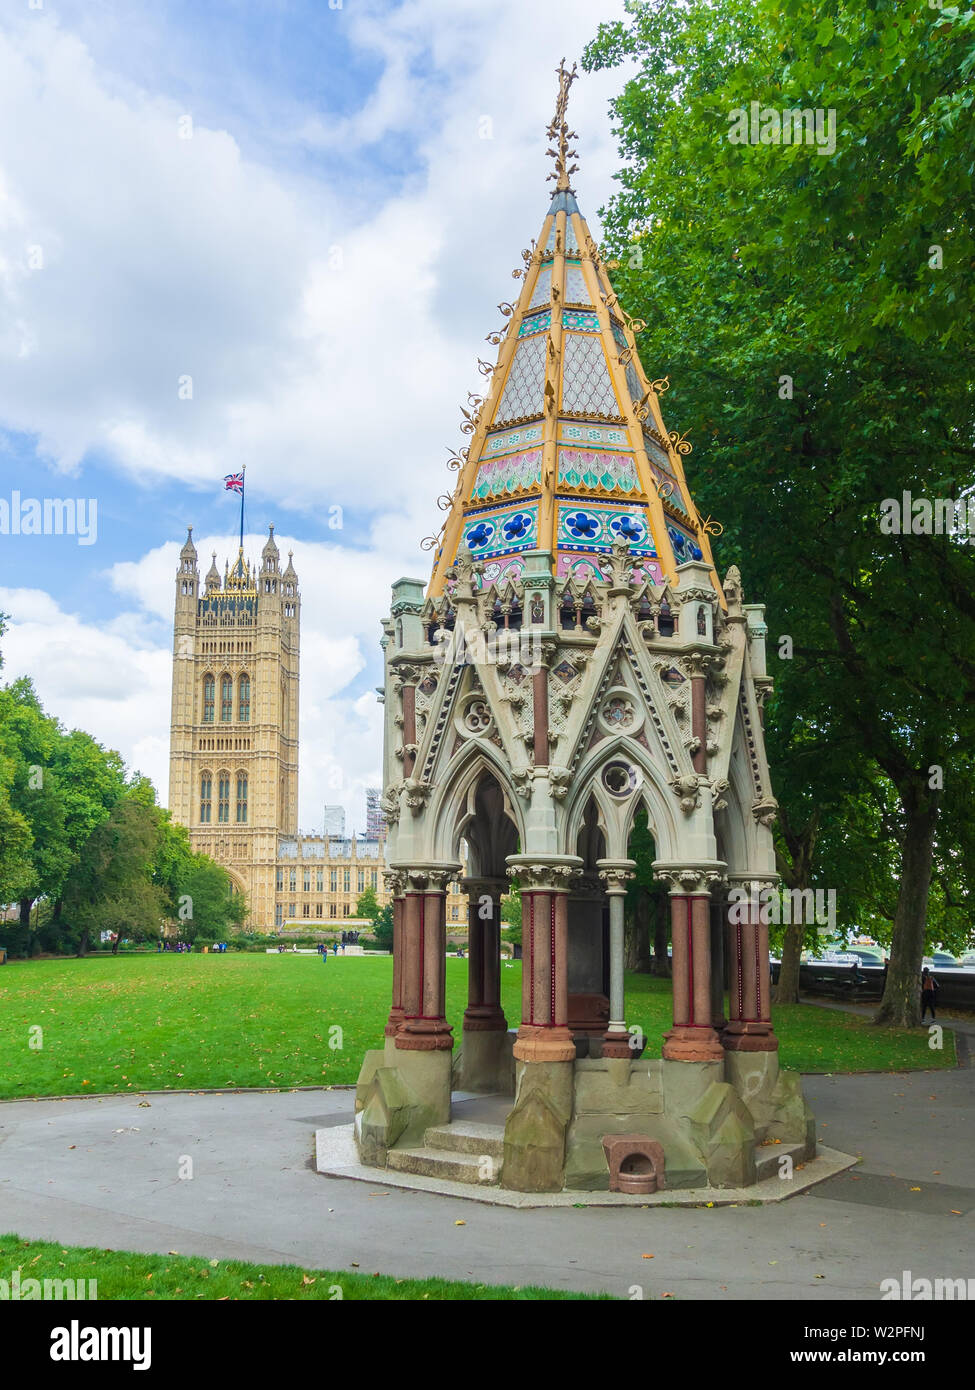 Victoria Tower Gardens park, with the Victoria Tower, the Houses of Parliament and the Buxton Memorial Fountain in the foreground, Westminster, London. Stock Photo